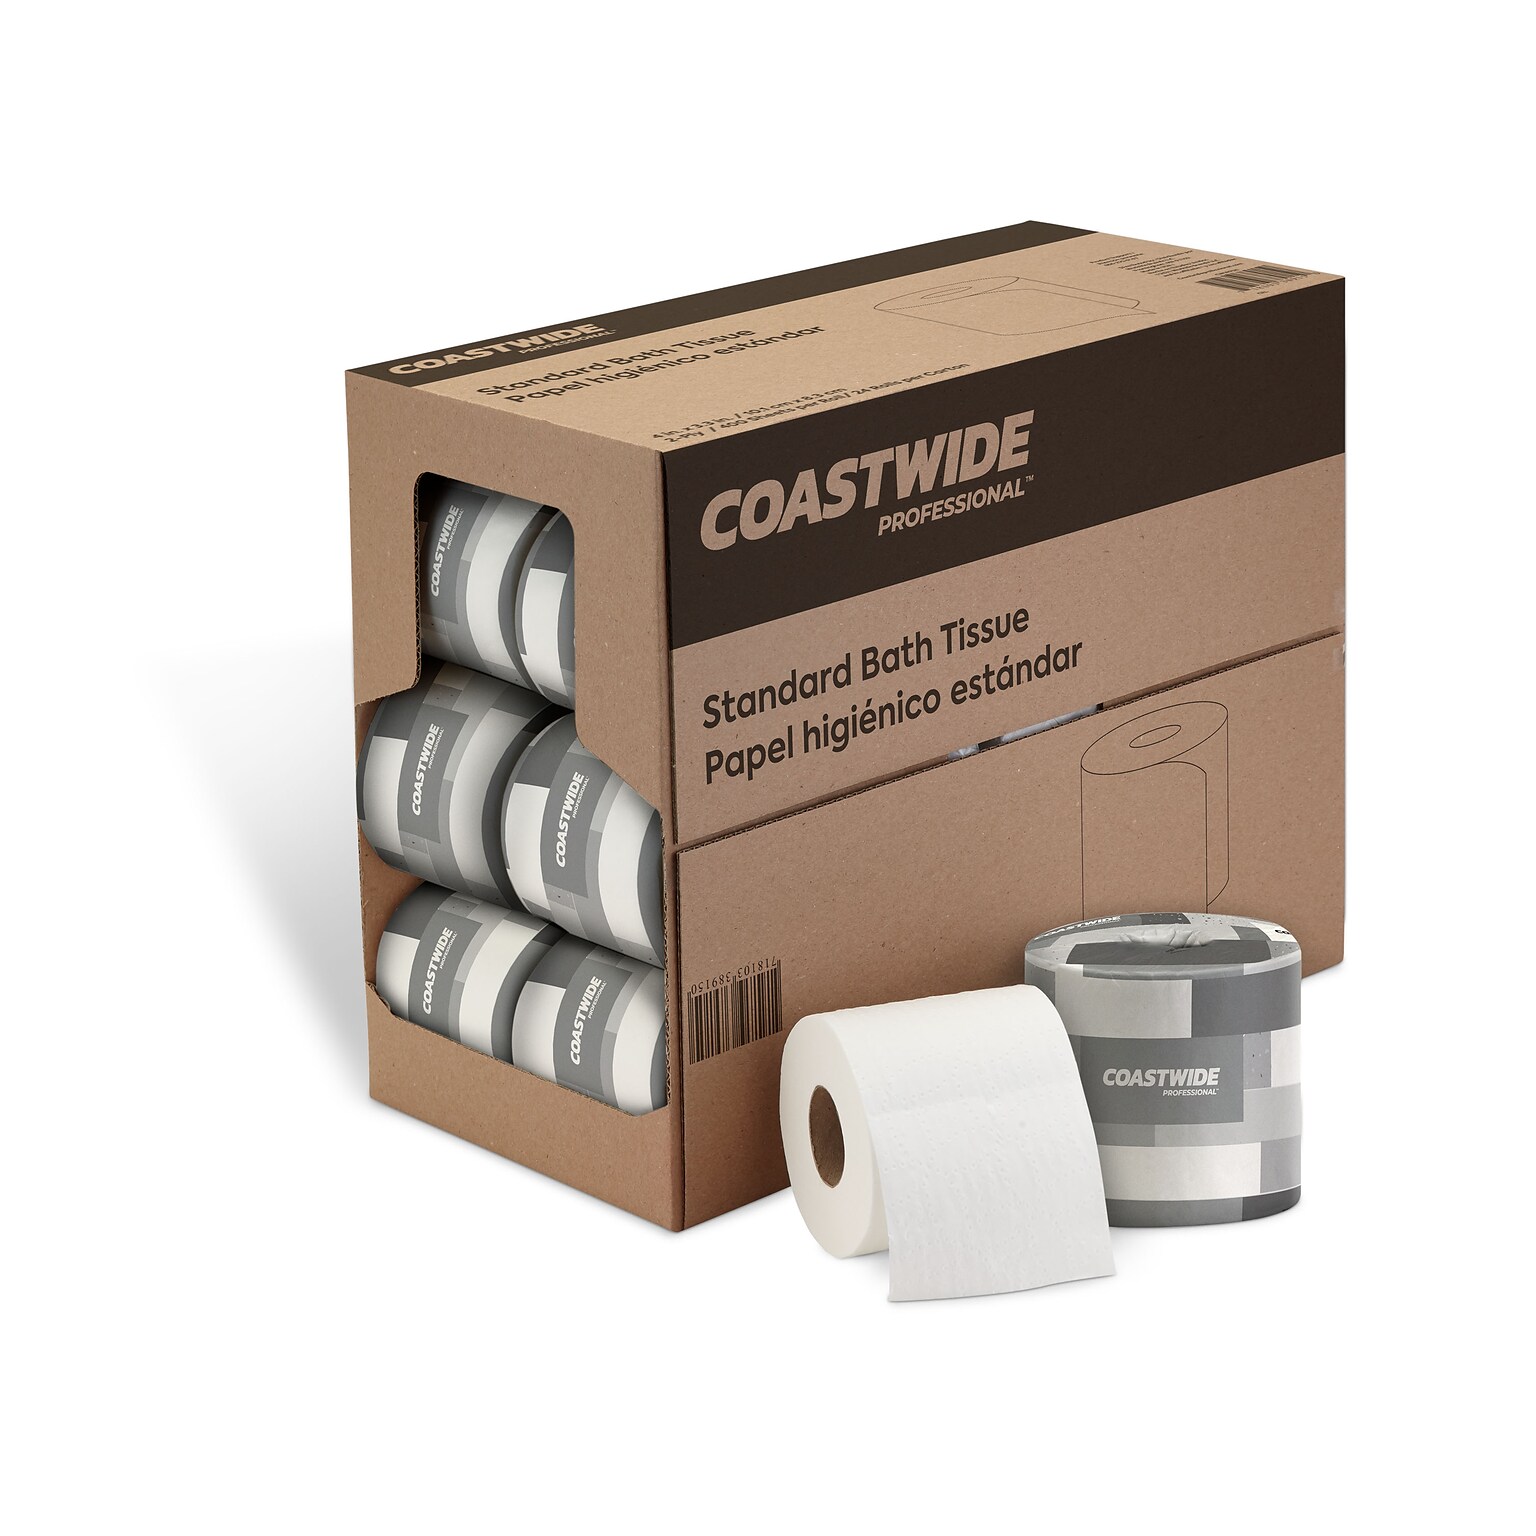 Coastwide Professional™ 2-Ply Standard Toilet Paper, White, 400 Sheets/Roll, 24 Rolls/Case (CW59750-CC)